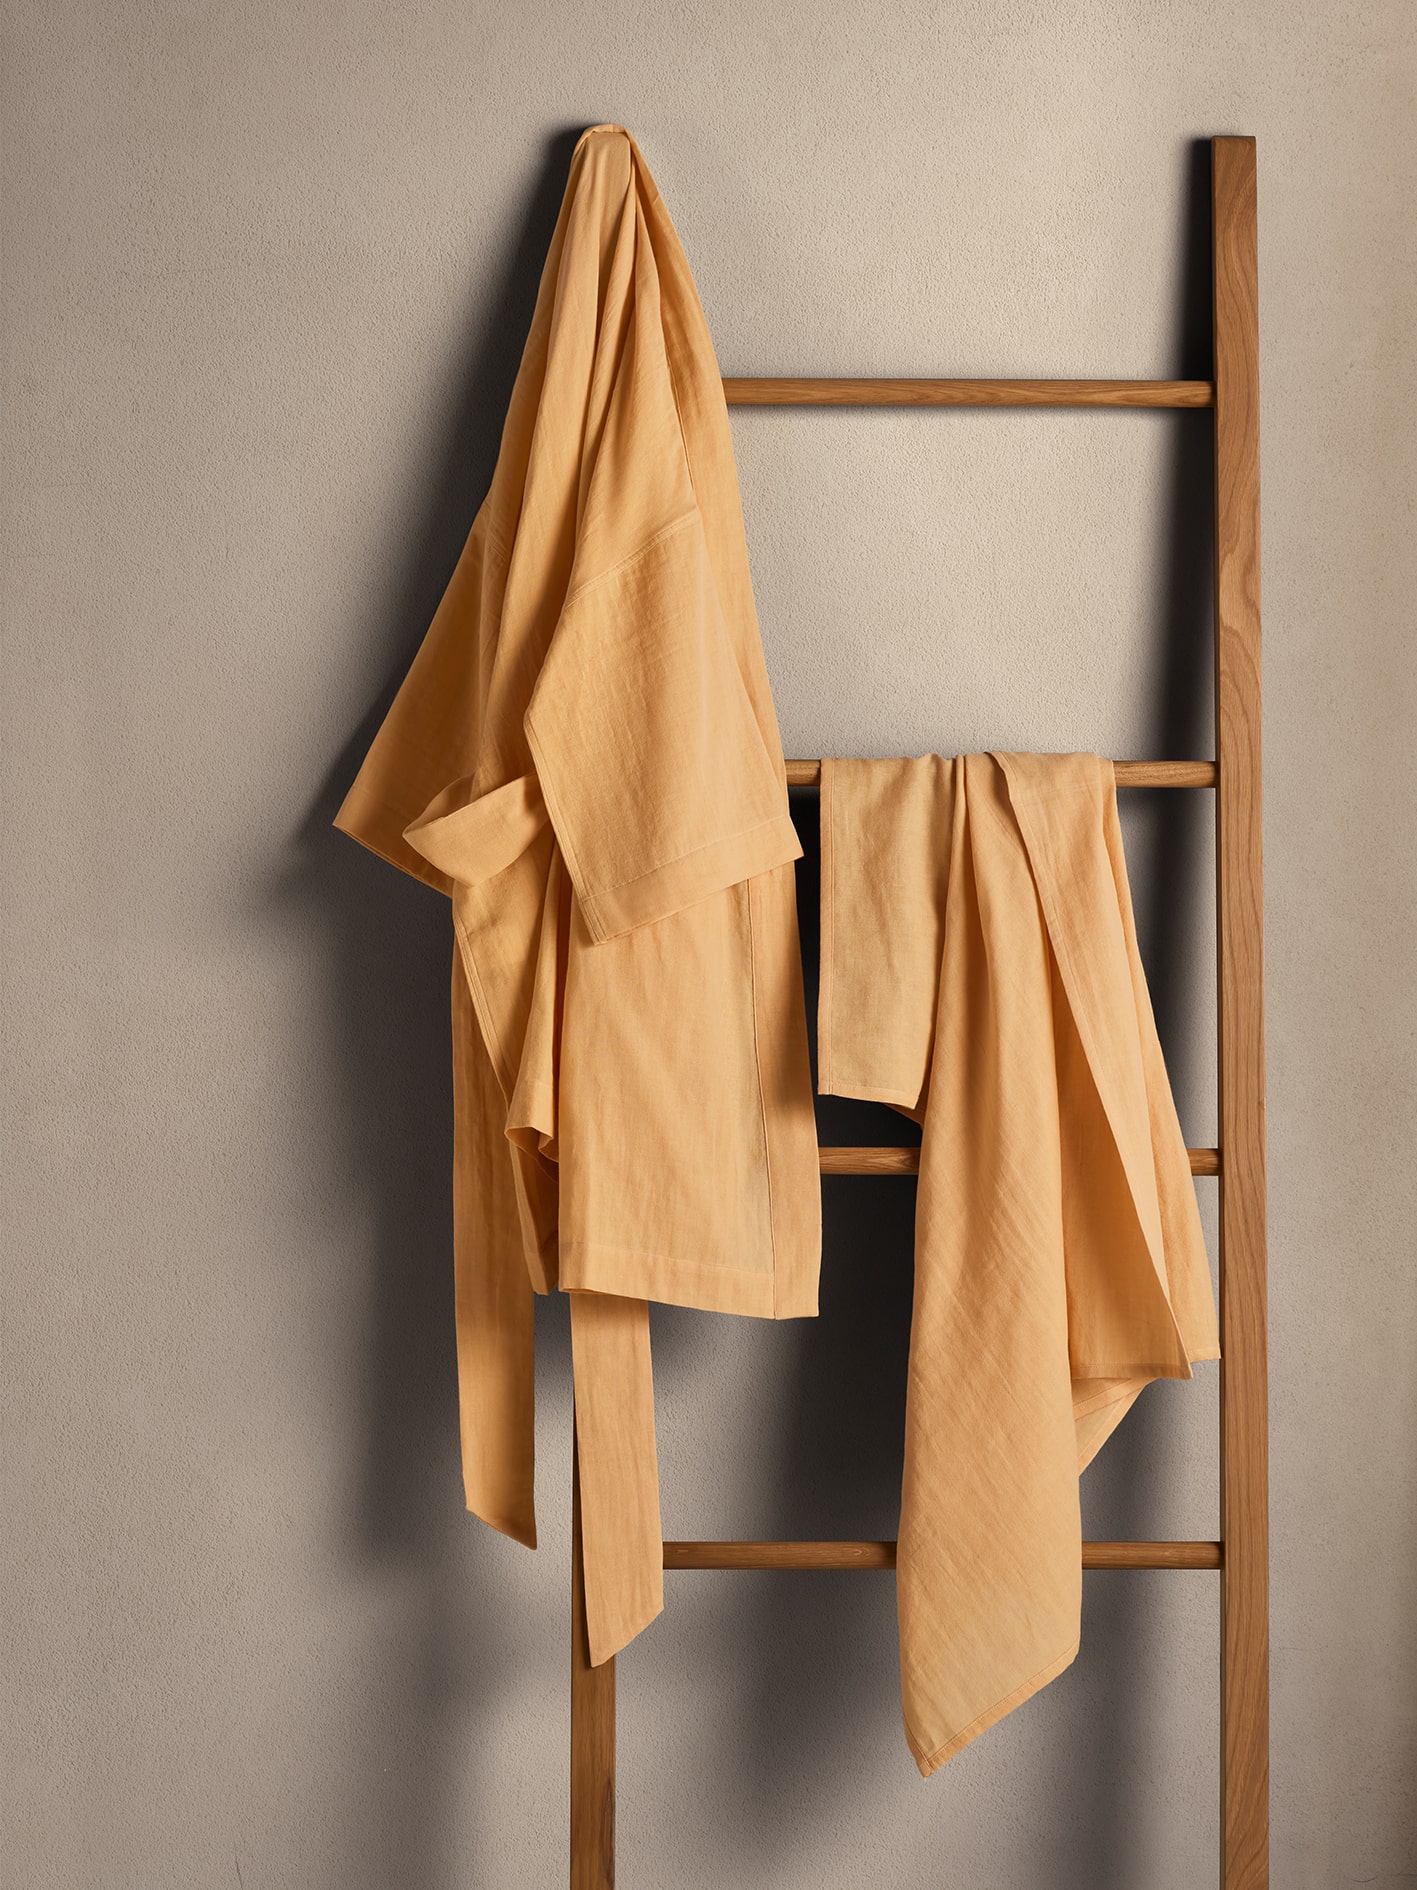 biege colourd wall, with brown wooden ladder hanging from it. rockmelon coloured belgian flax linen robe and wrap are draped on top of ladder and rung, respectively. r